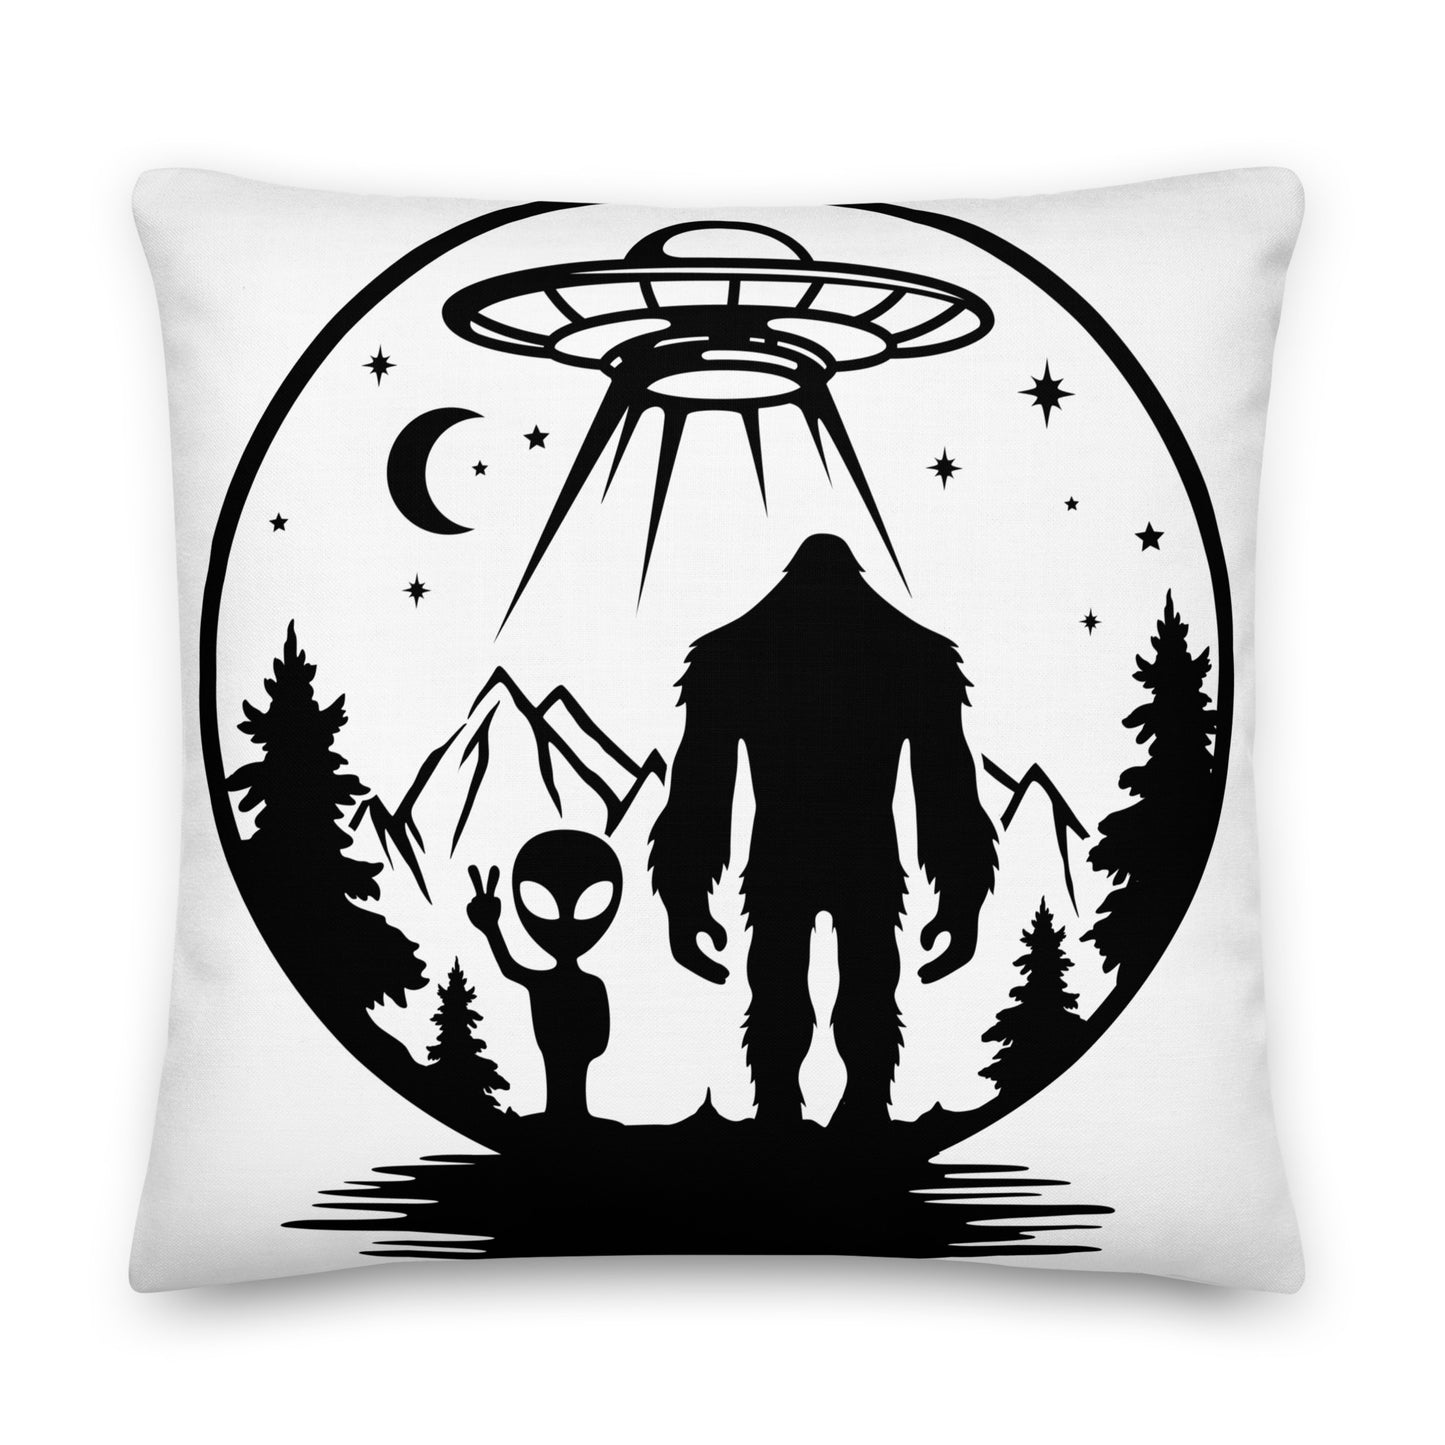 "We Are Here" Premium Pillow